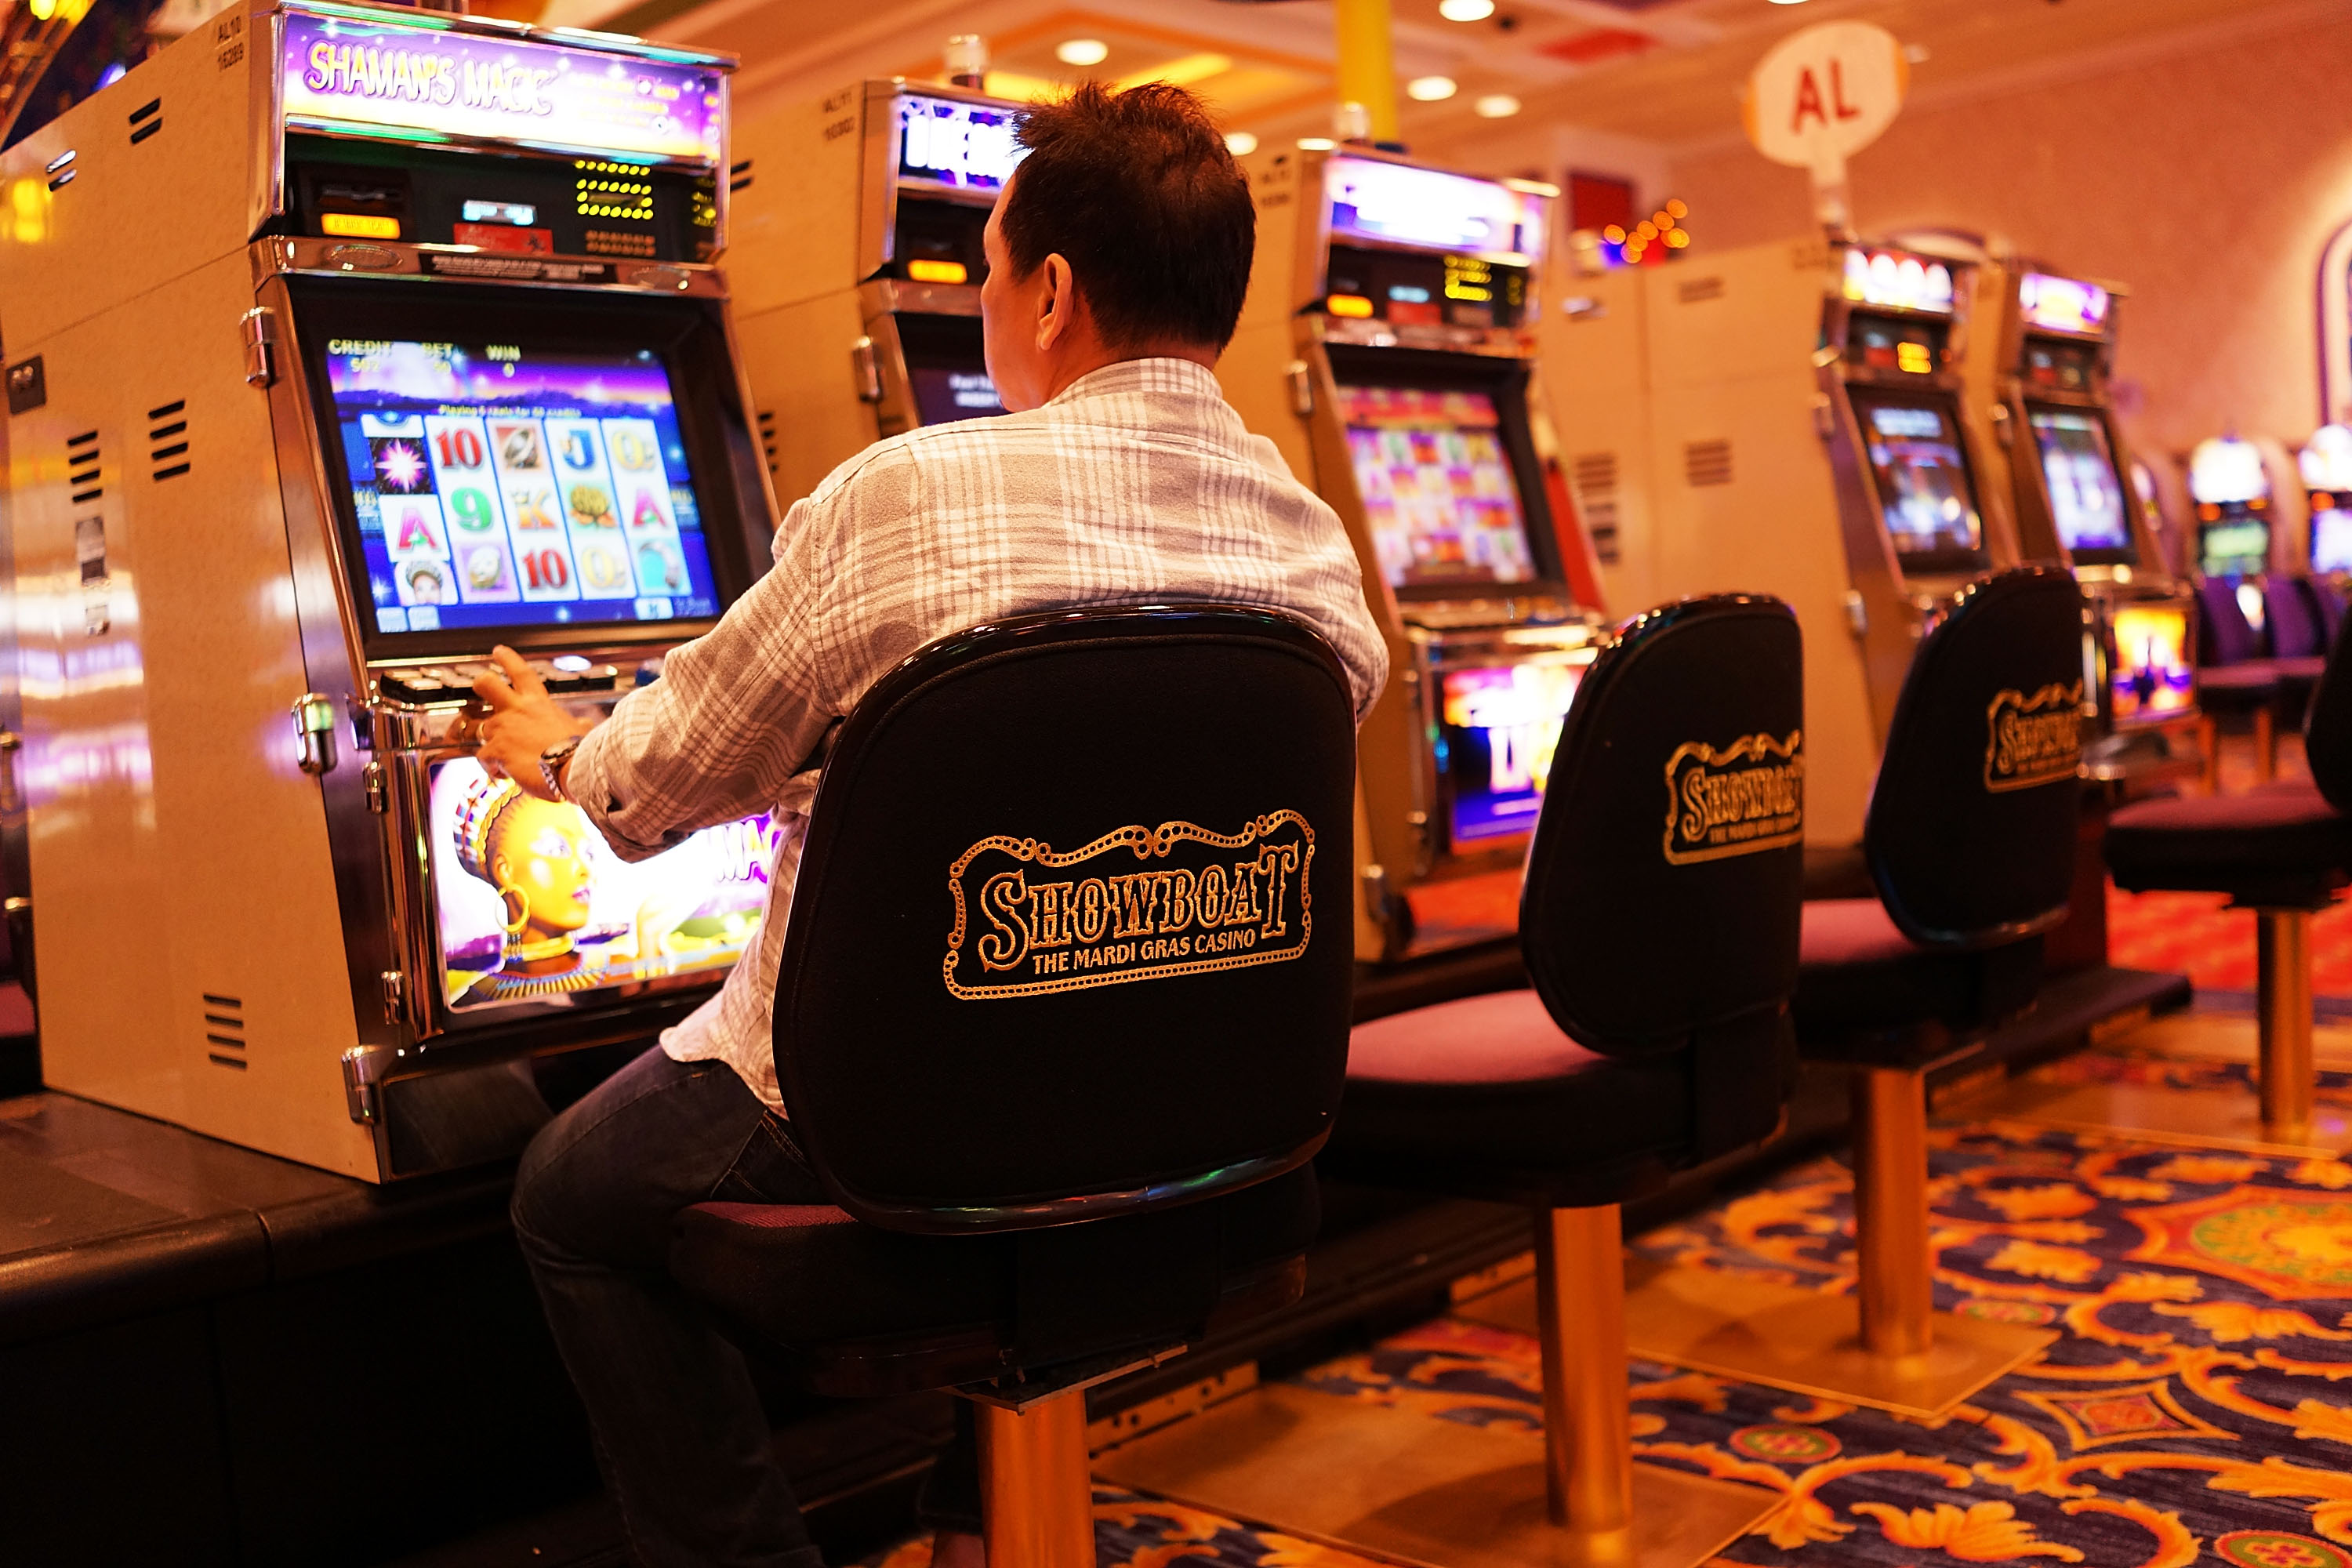 A man gambles at the Showboat casino, which is scheduled to close, in Atlantic City, N.J., on July 29, 2014 (Spencer Platt—Getty Images)